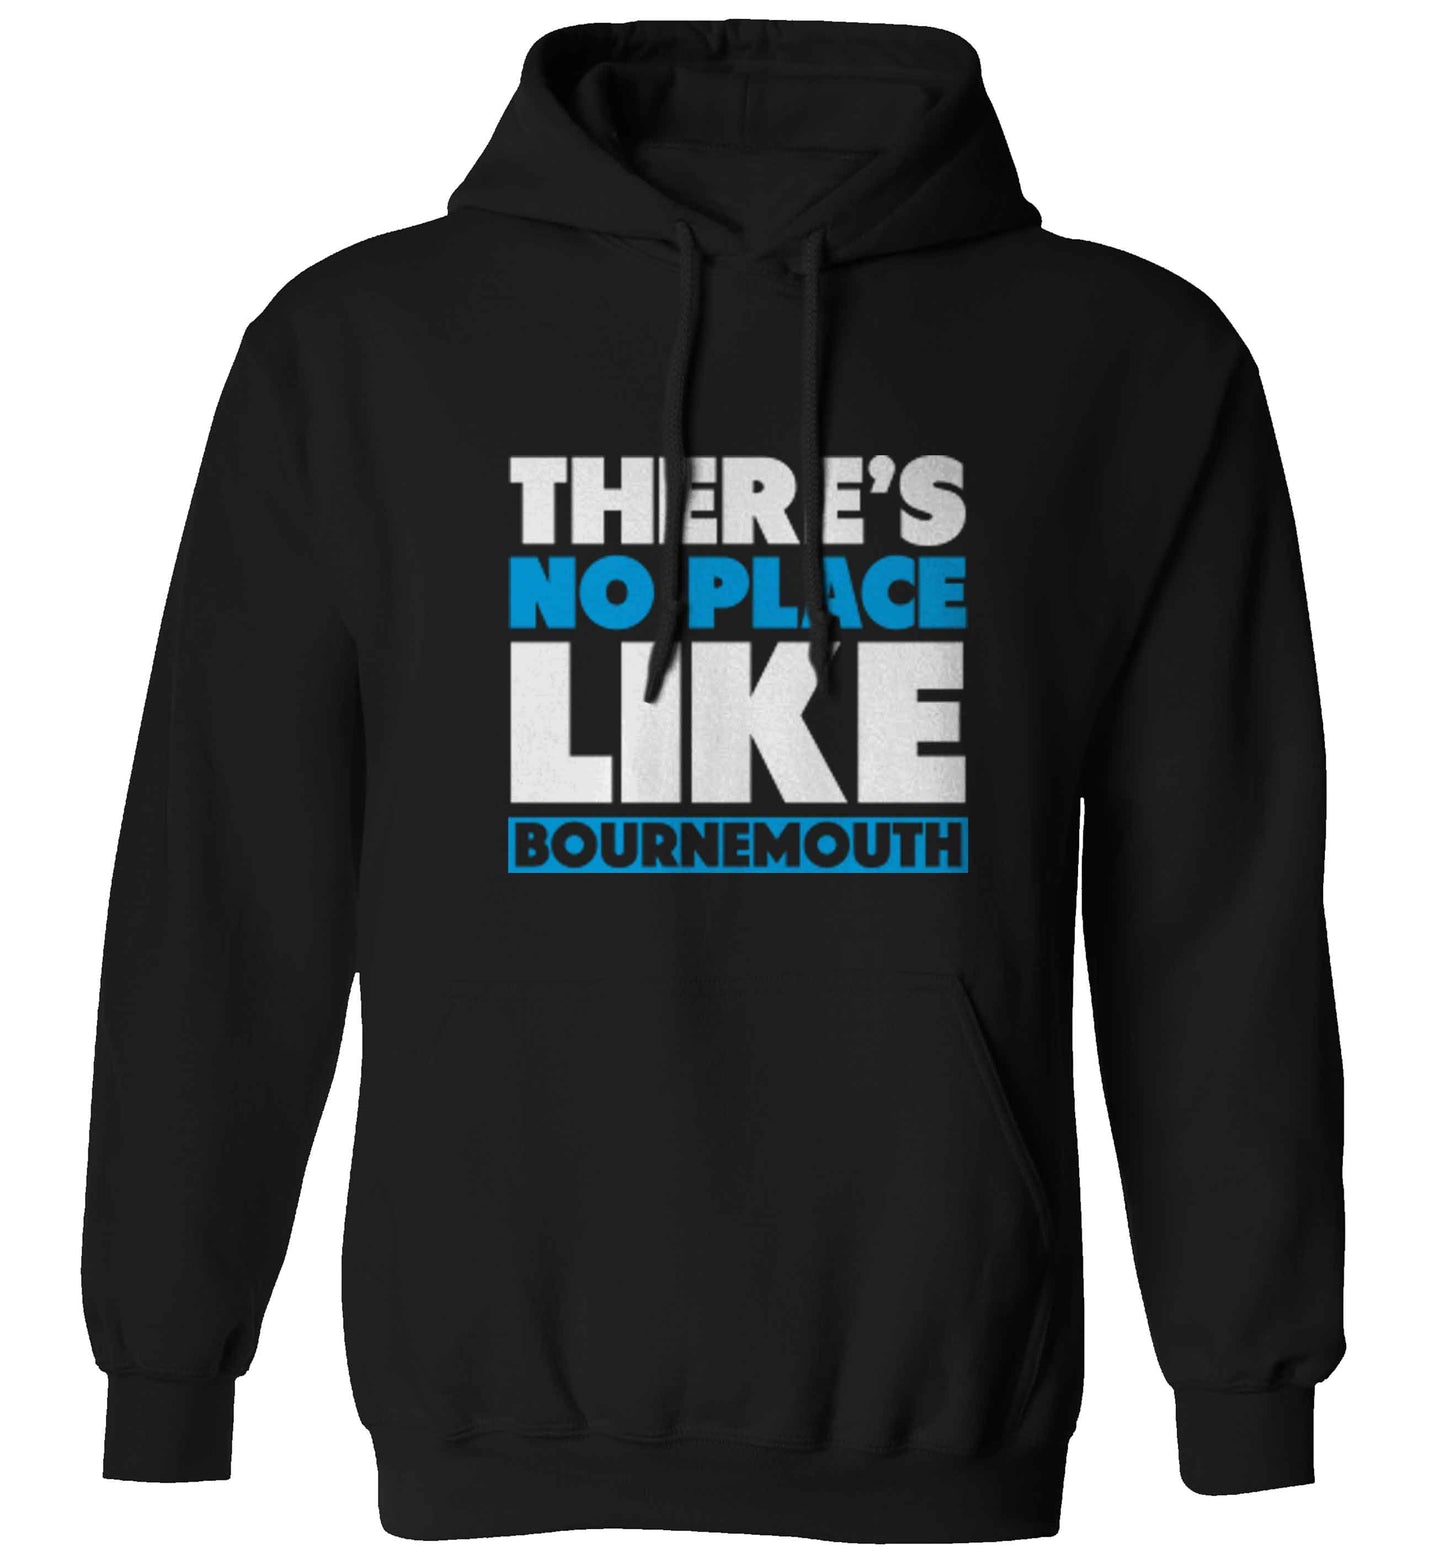 There's no place like Bournemouth adults unisex black hoodie 2XL